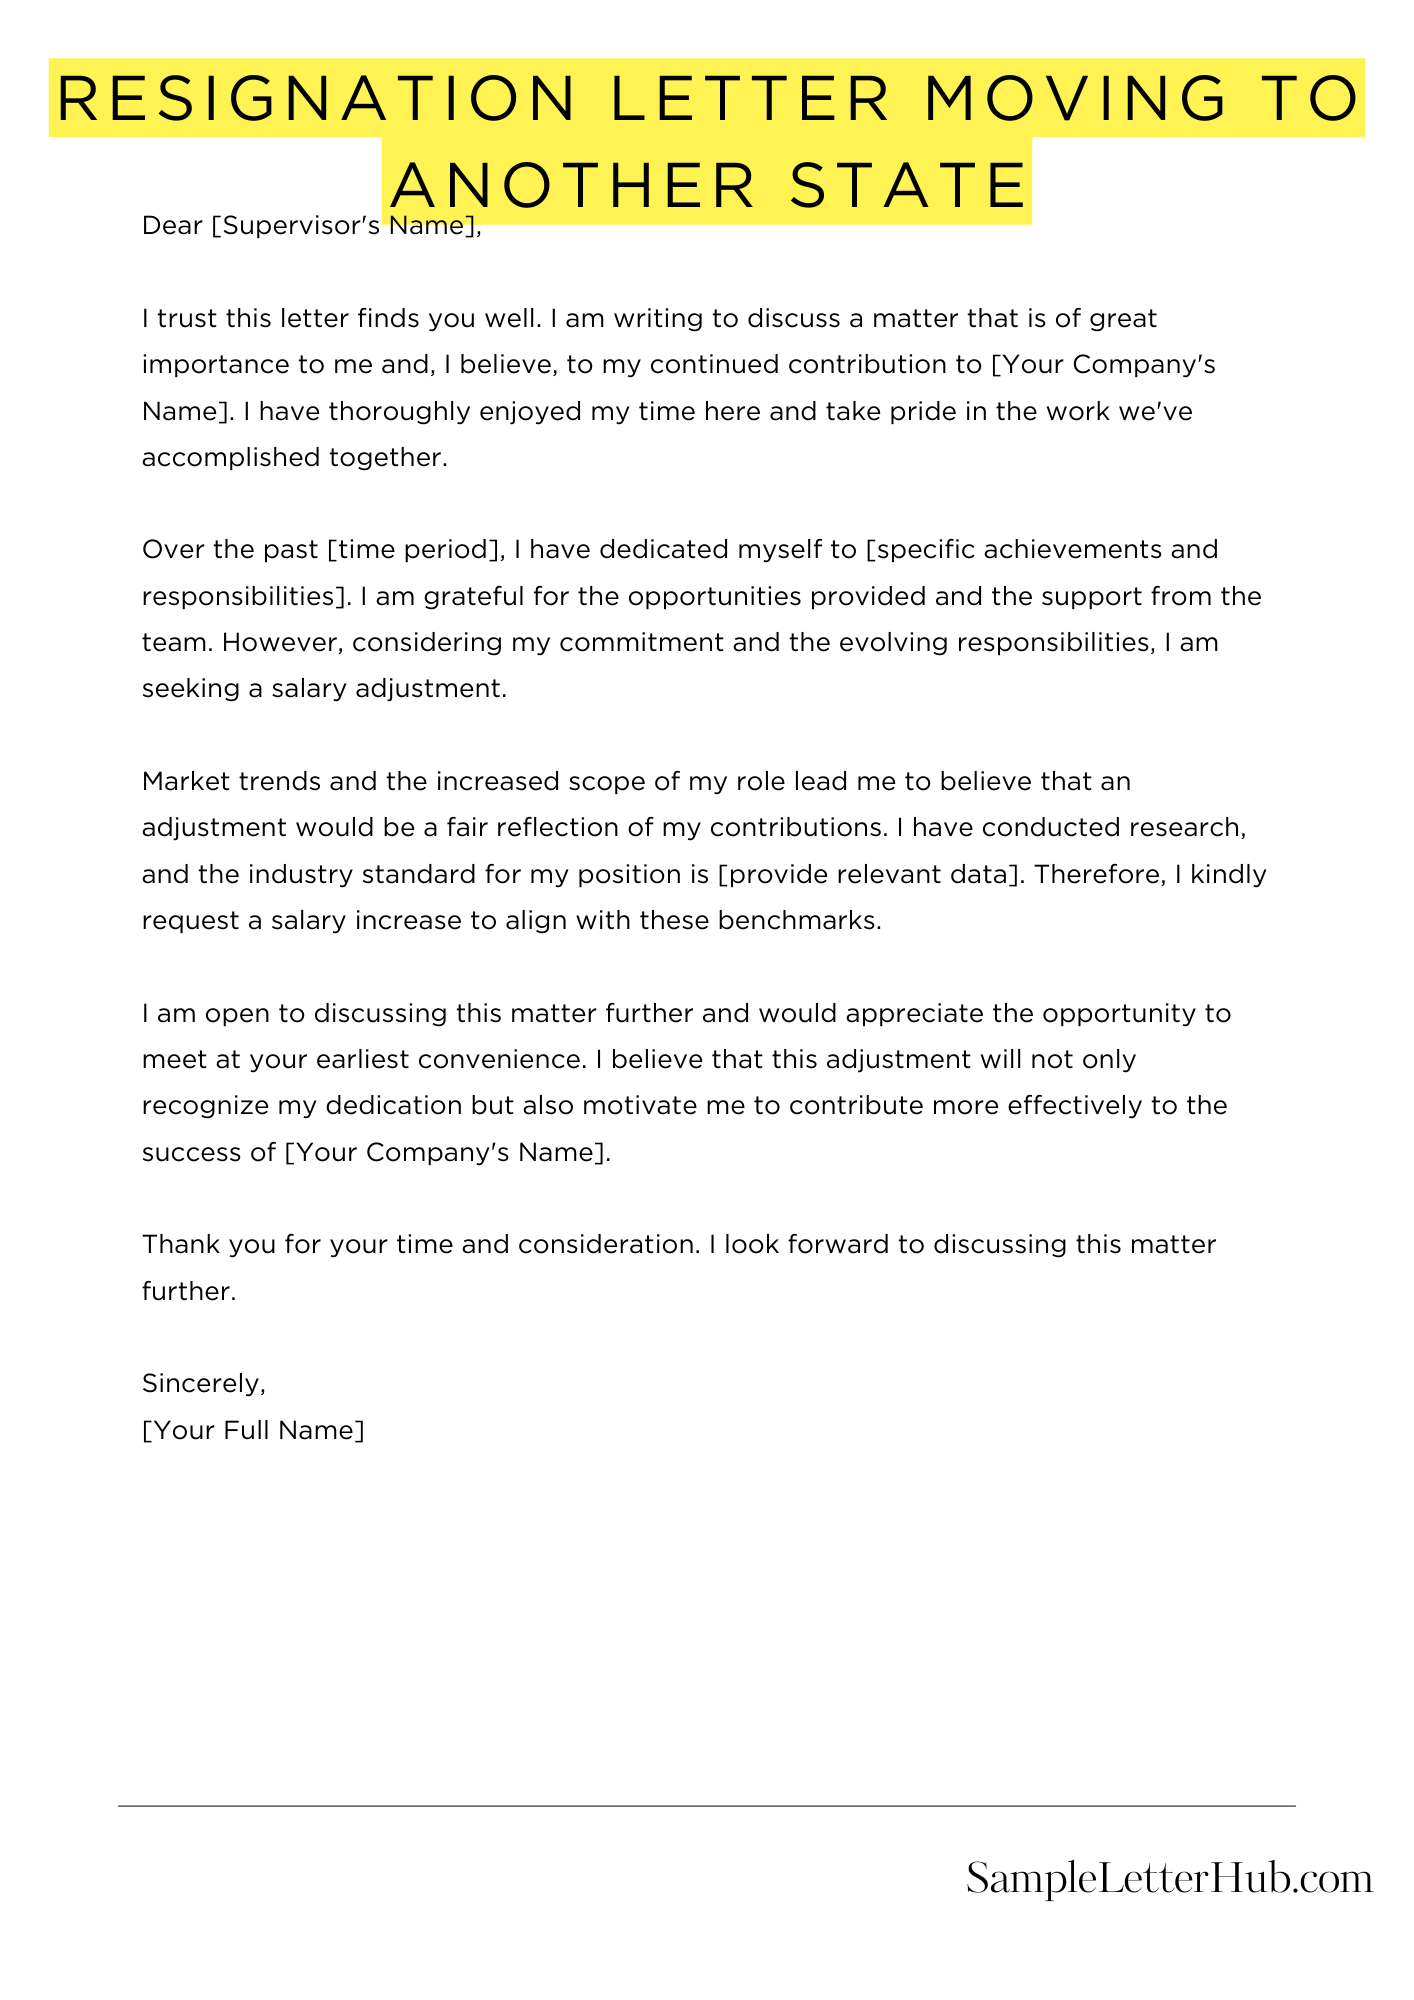 Resignation Letter Moving To Another State